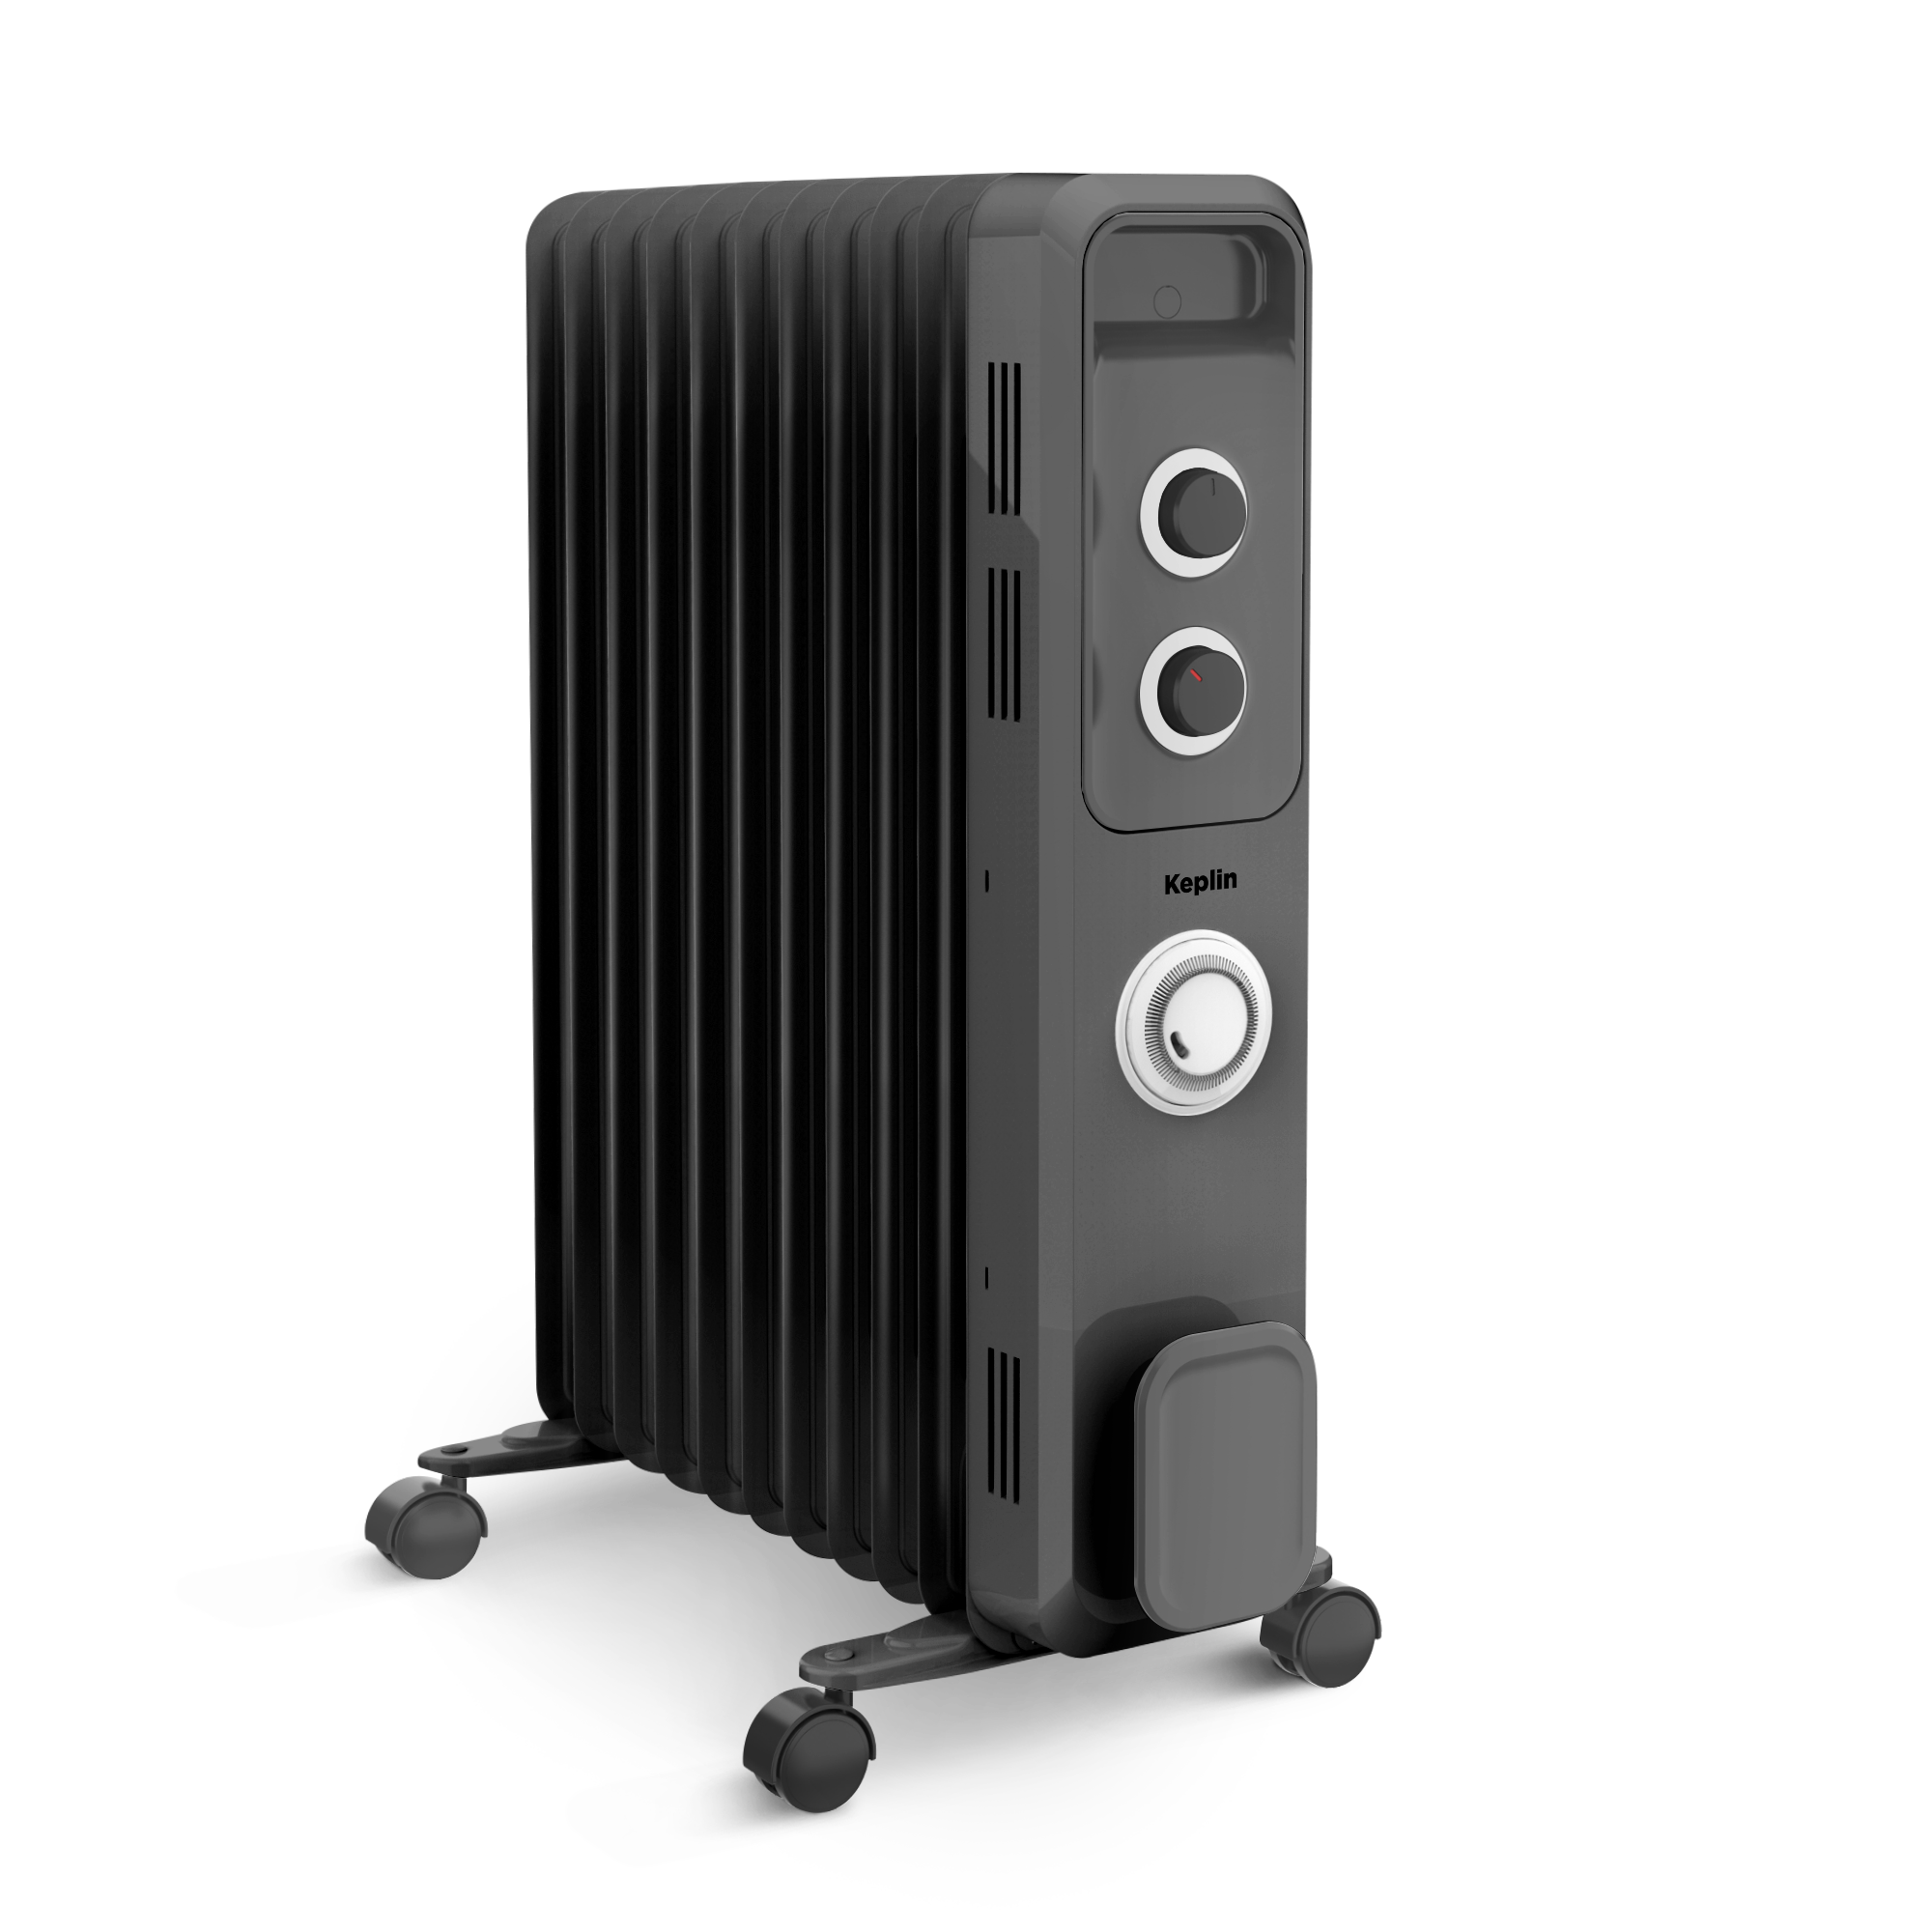 2500W Oil Filled Radiator With Timer - Efficient & Portable Electric Heater with Remote Control